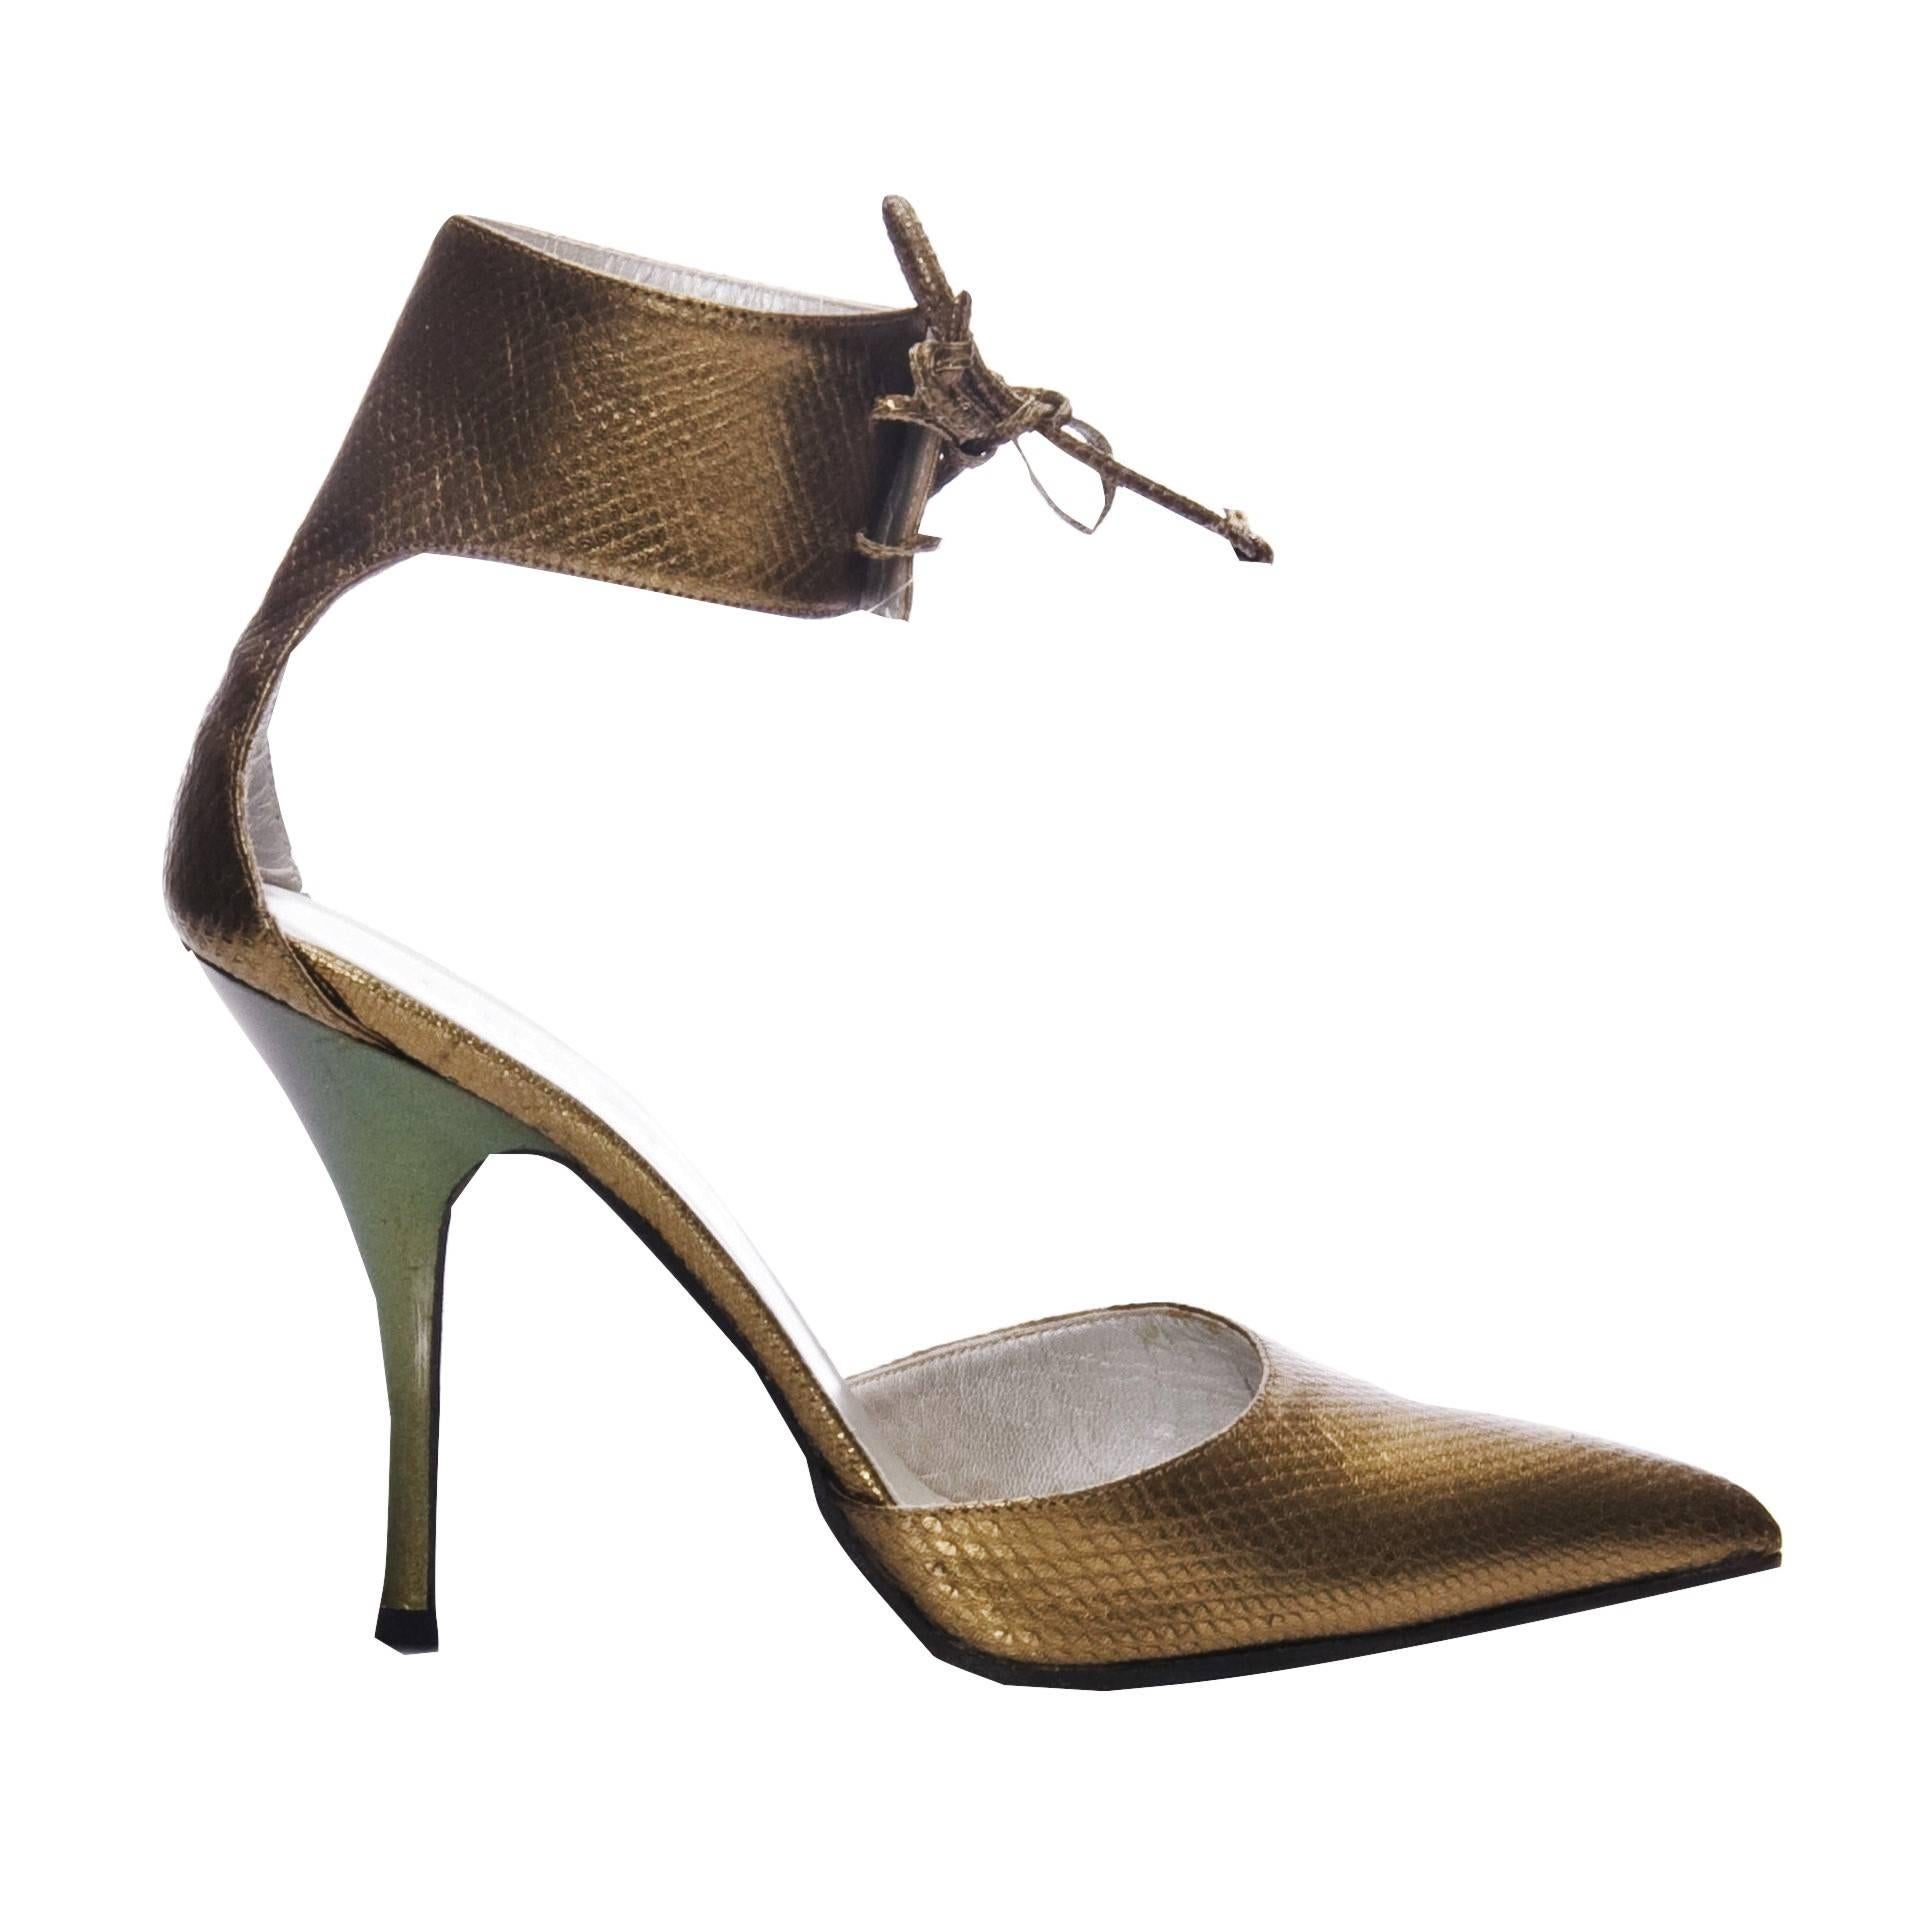 New Tom Ford for Gucci Kate Moss Ad Runway Heels Pumps  1